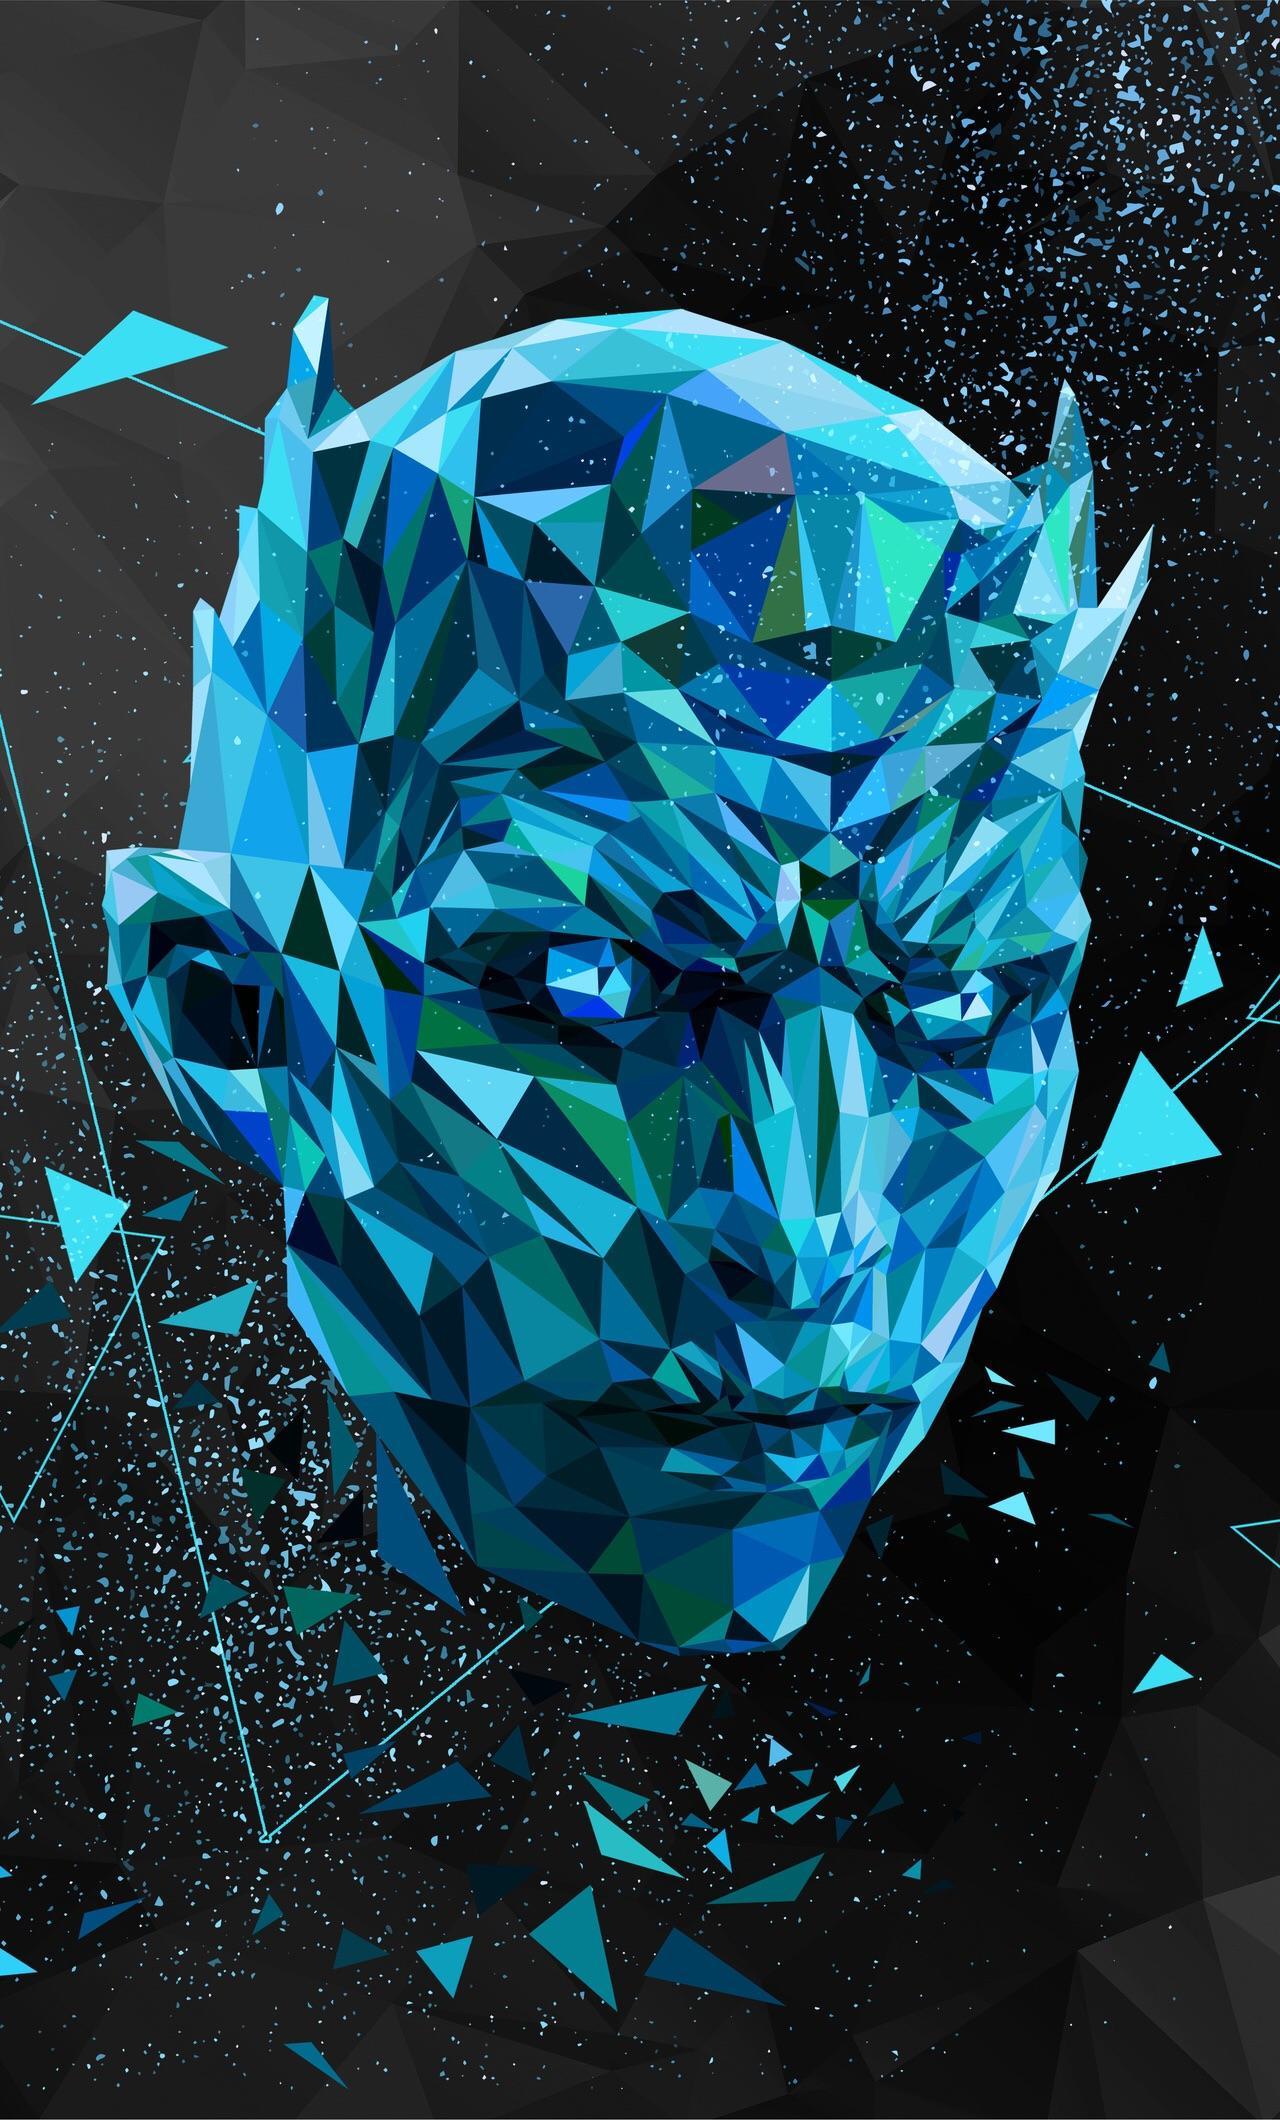 My Night King Wallpaper. Feel free to steal